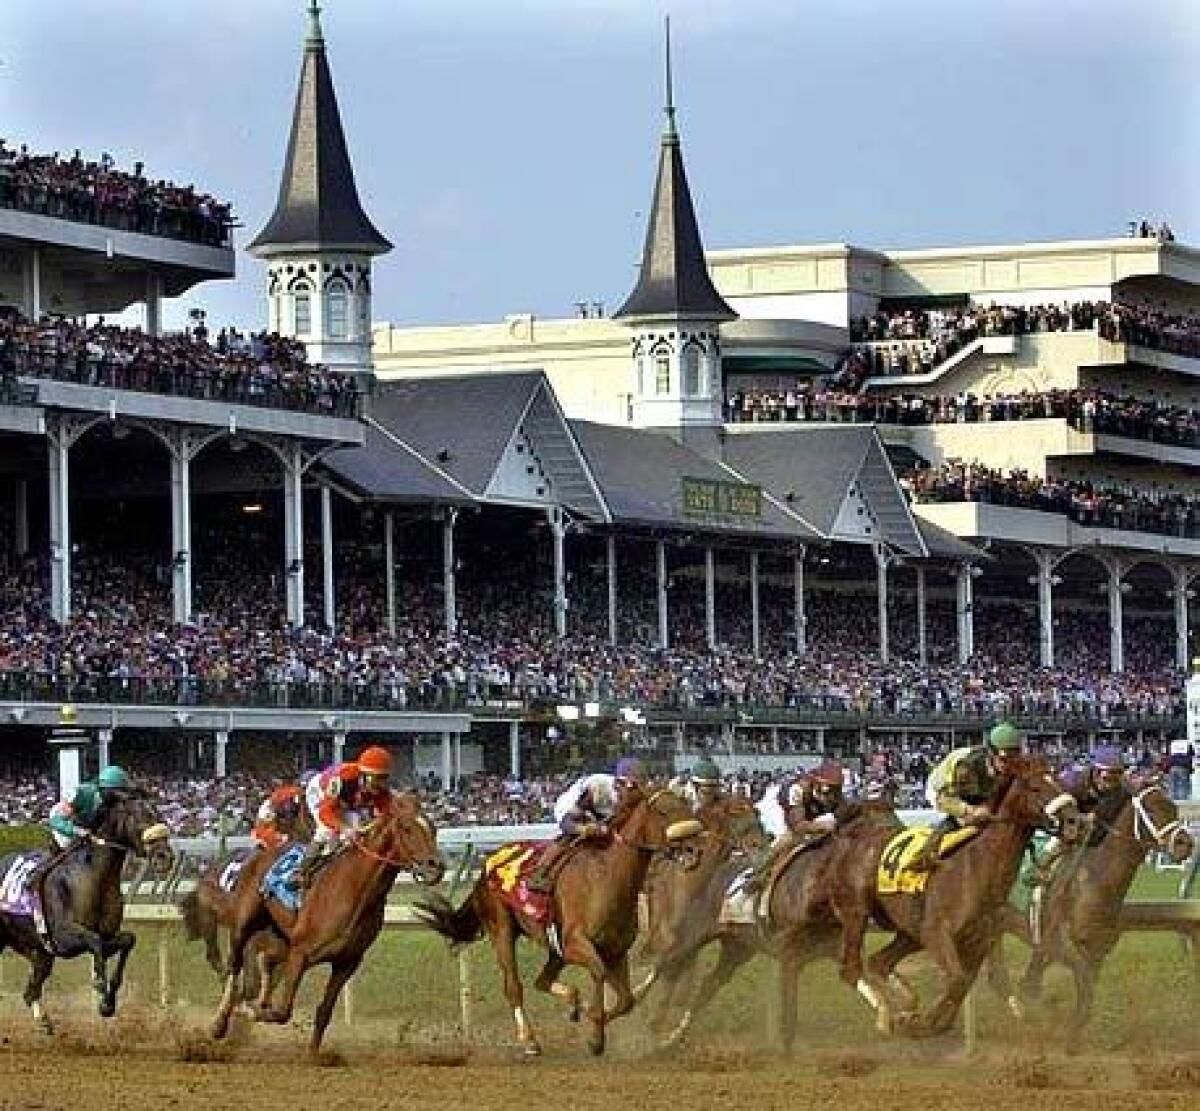 The Kentucky Derby at Churchill Downs, "the most exciting two minutes in sports," has been postponed until September.